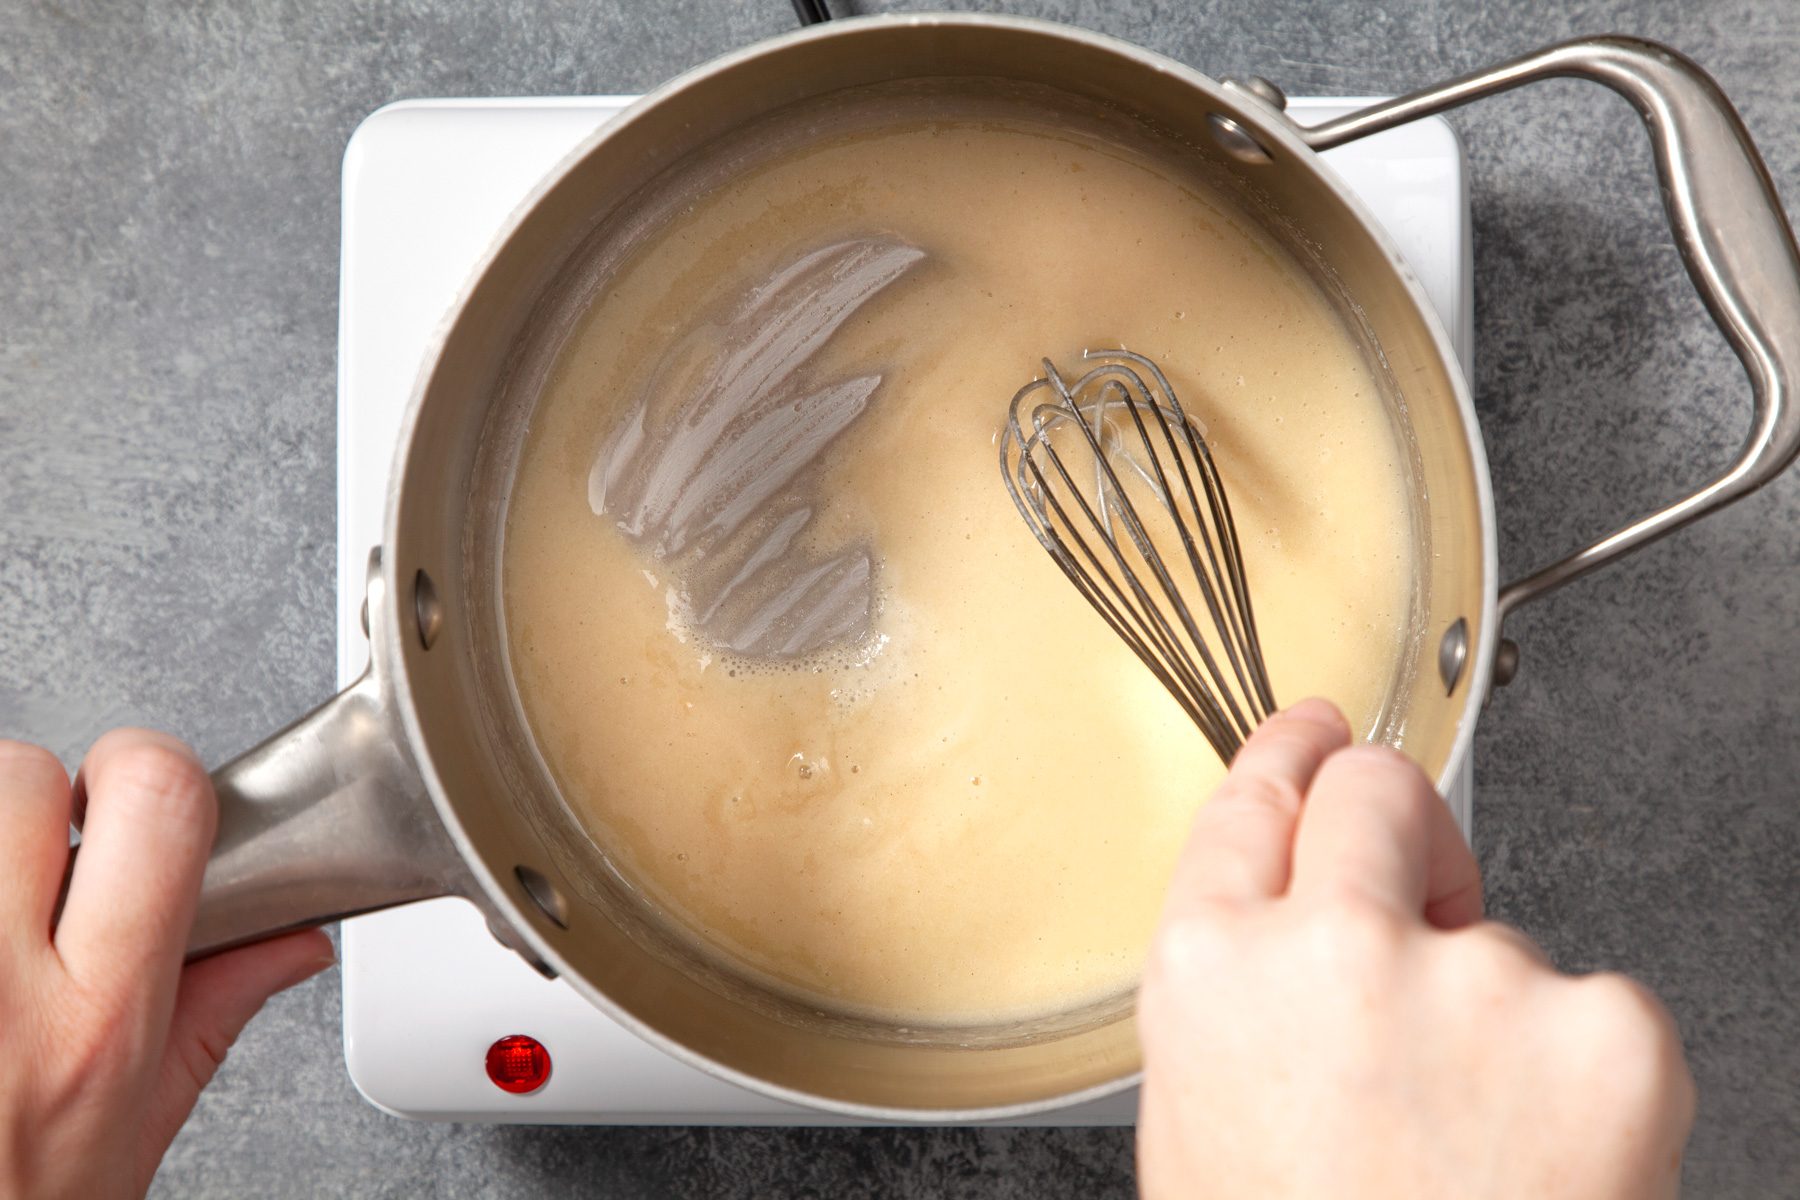 A hand holding a saucepan and whisking the mixture with the other hand